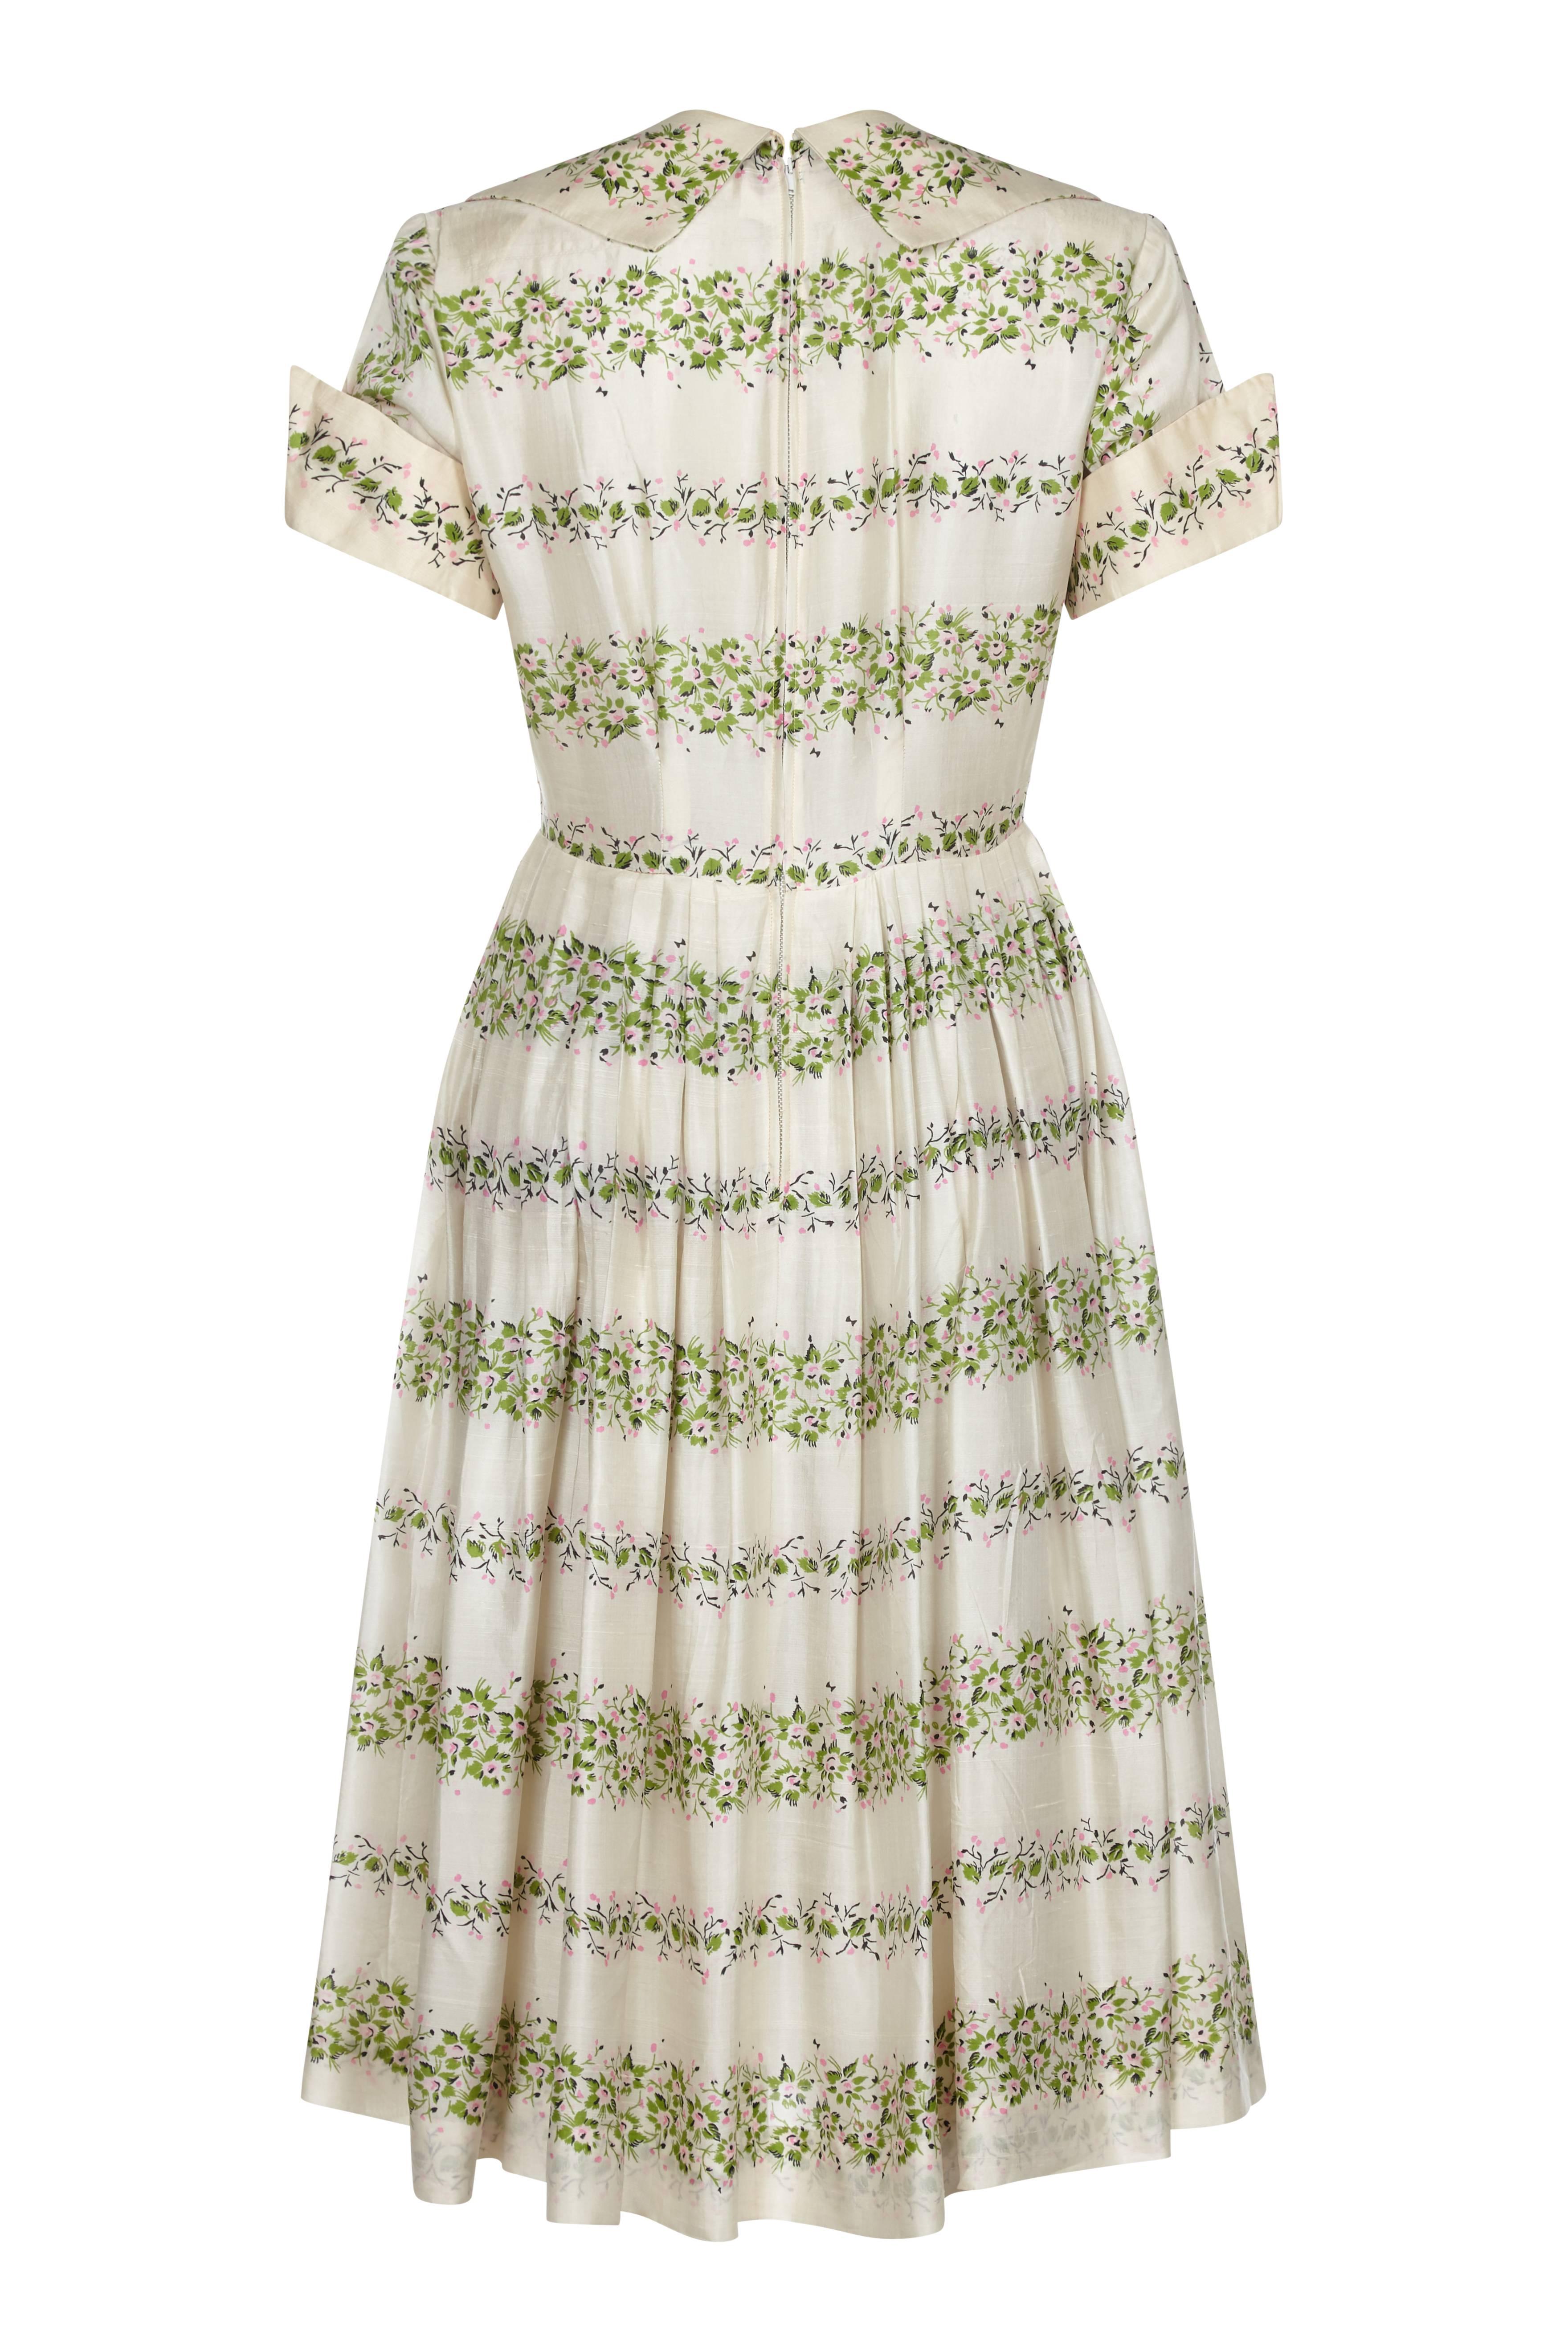 This effortlessly pretty 1950s pure silk day dress embodies the spirit of spring/summer. The colour is predominantly cream, with a light pink and green floral motif that runs the length of the dress in soft horizontal stripes. A classic 1950s cut,